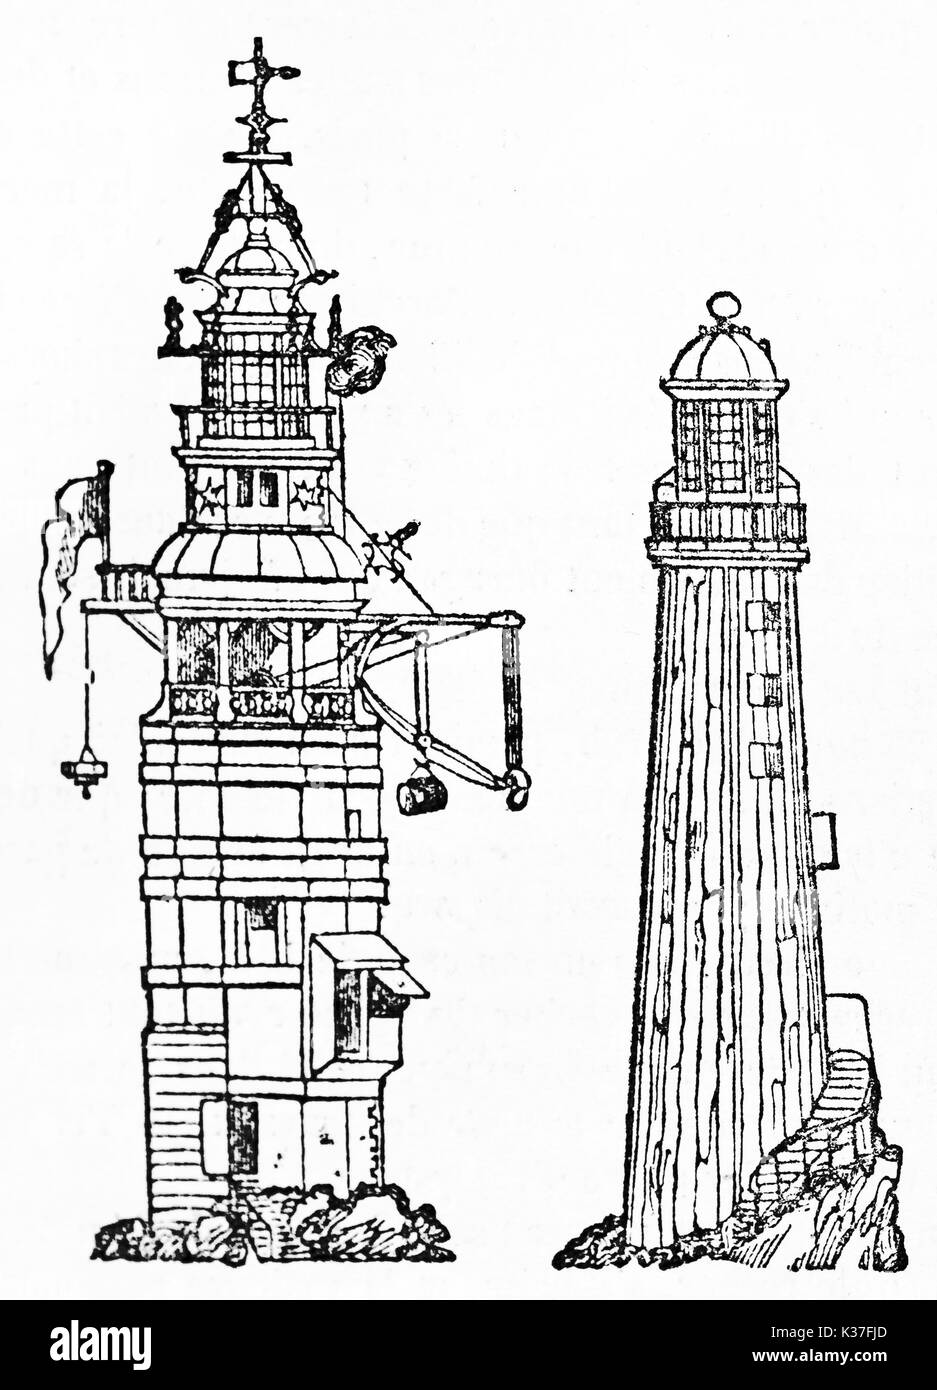 Two ancient lighthouses: Winstanley's the first from 1698 to 1703 and Rudyard's the second from 1709 to 1755. Old Illustration by unidentified author publ. on Magasin Pittoresque Paris 1834 Stock Photo